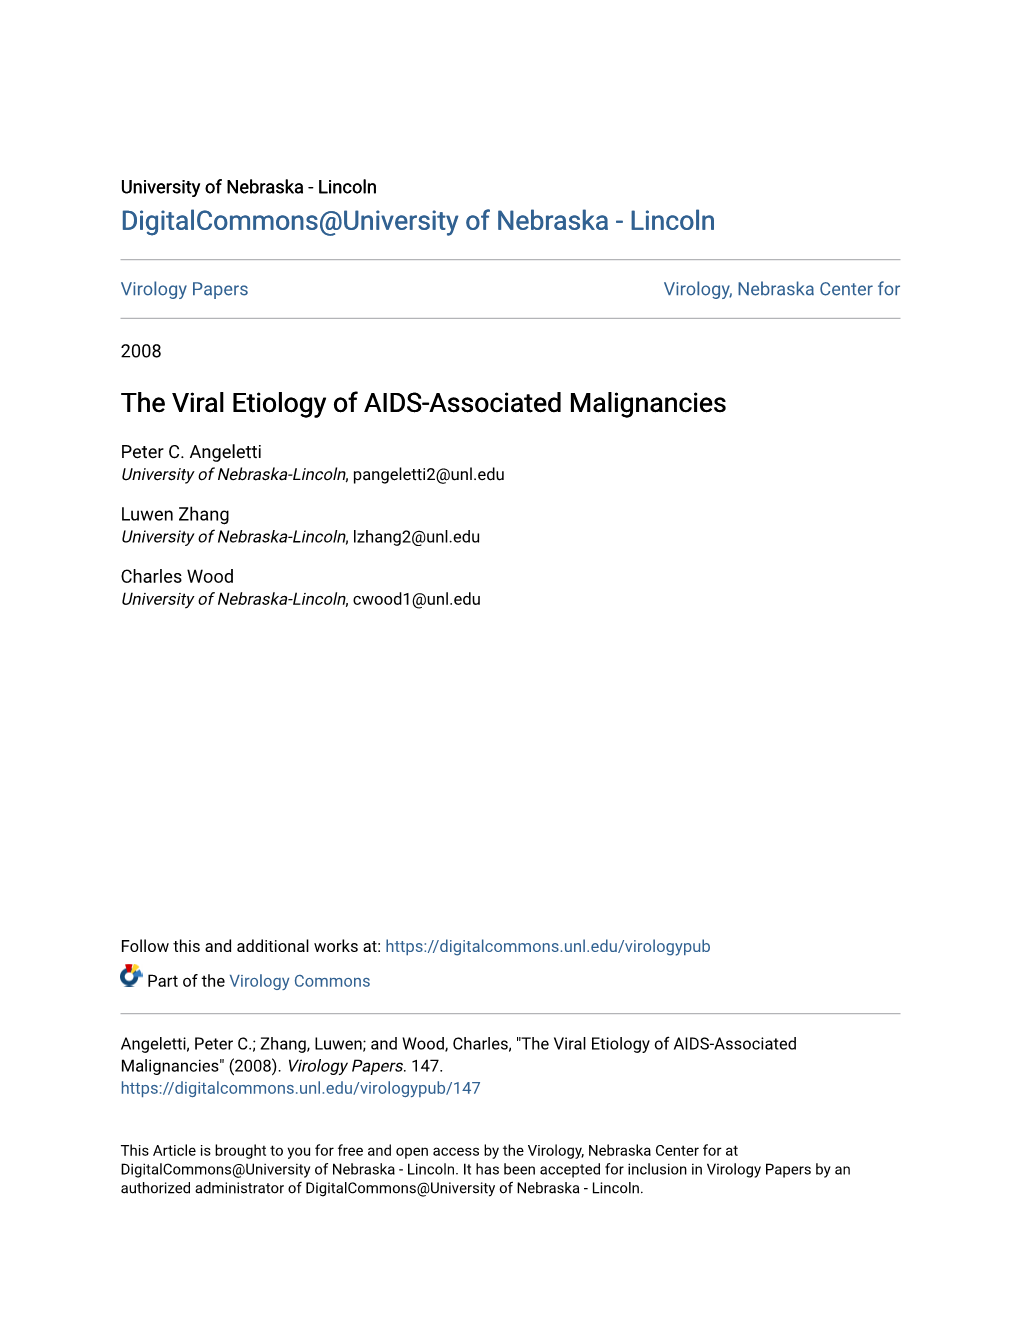 The Viral Etiology of AIDS-Associated Malignancies